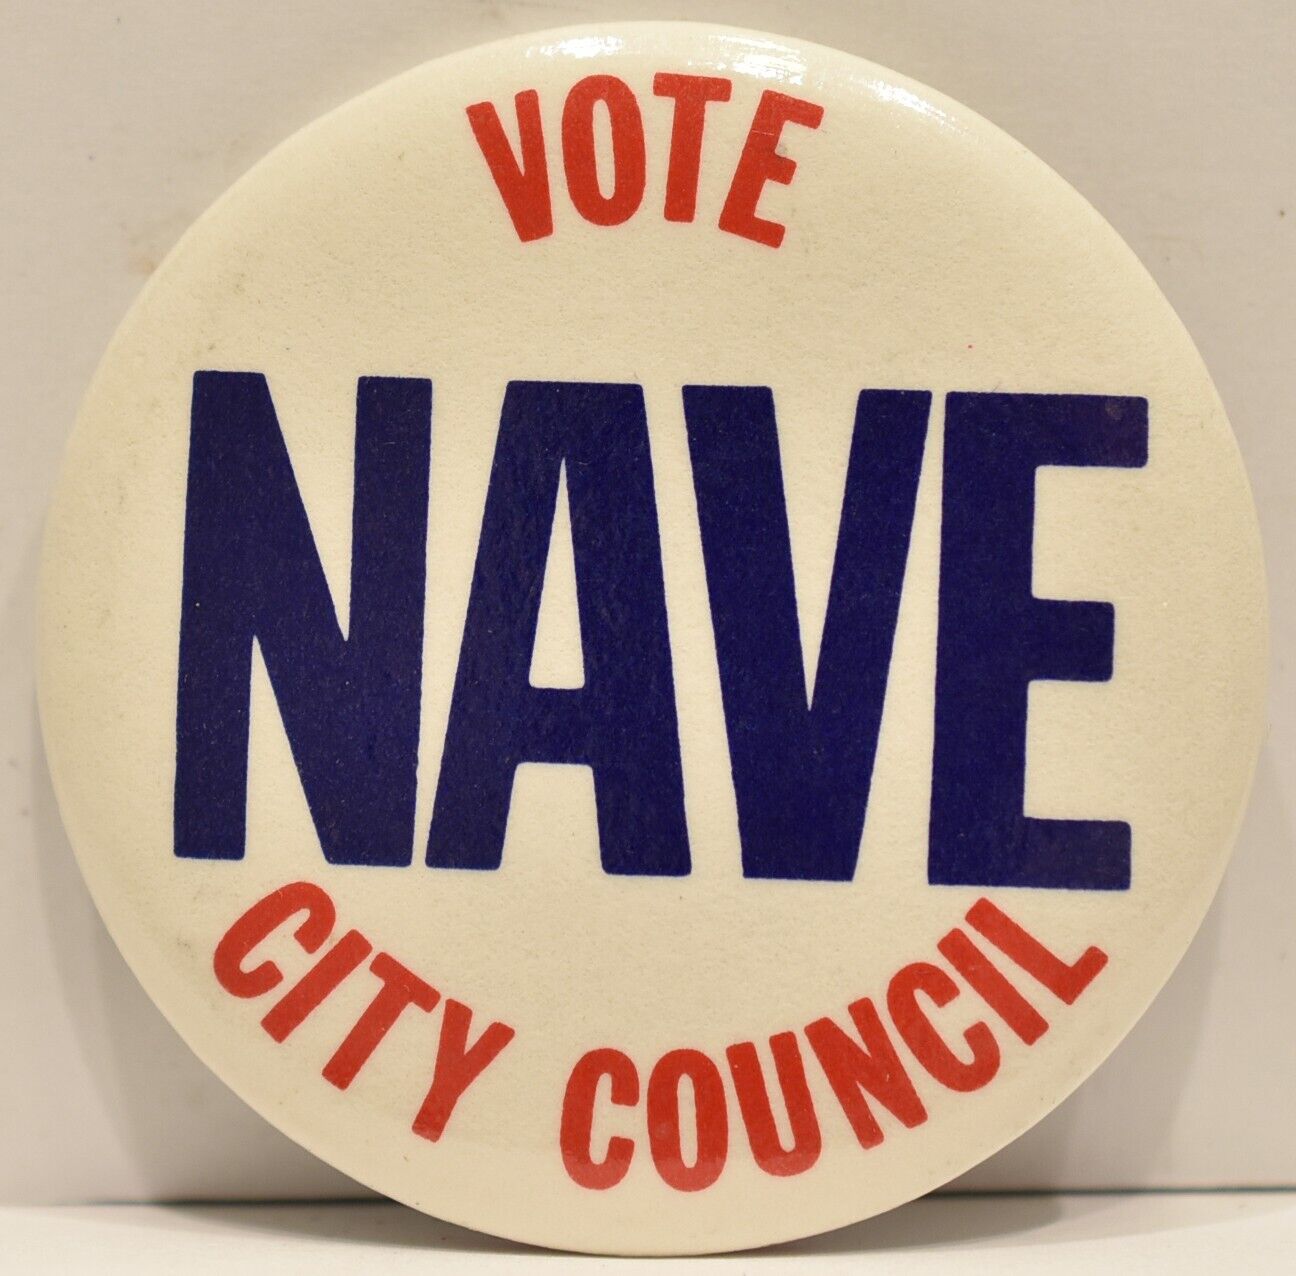 1990s Vote Meyers Nave City Council Marin County Political Campaign Pinback